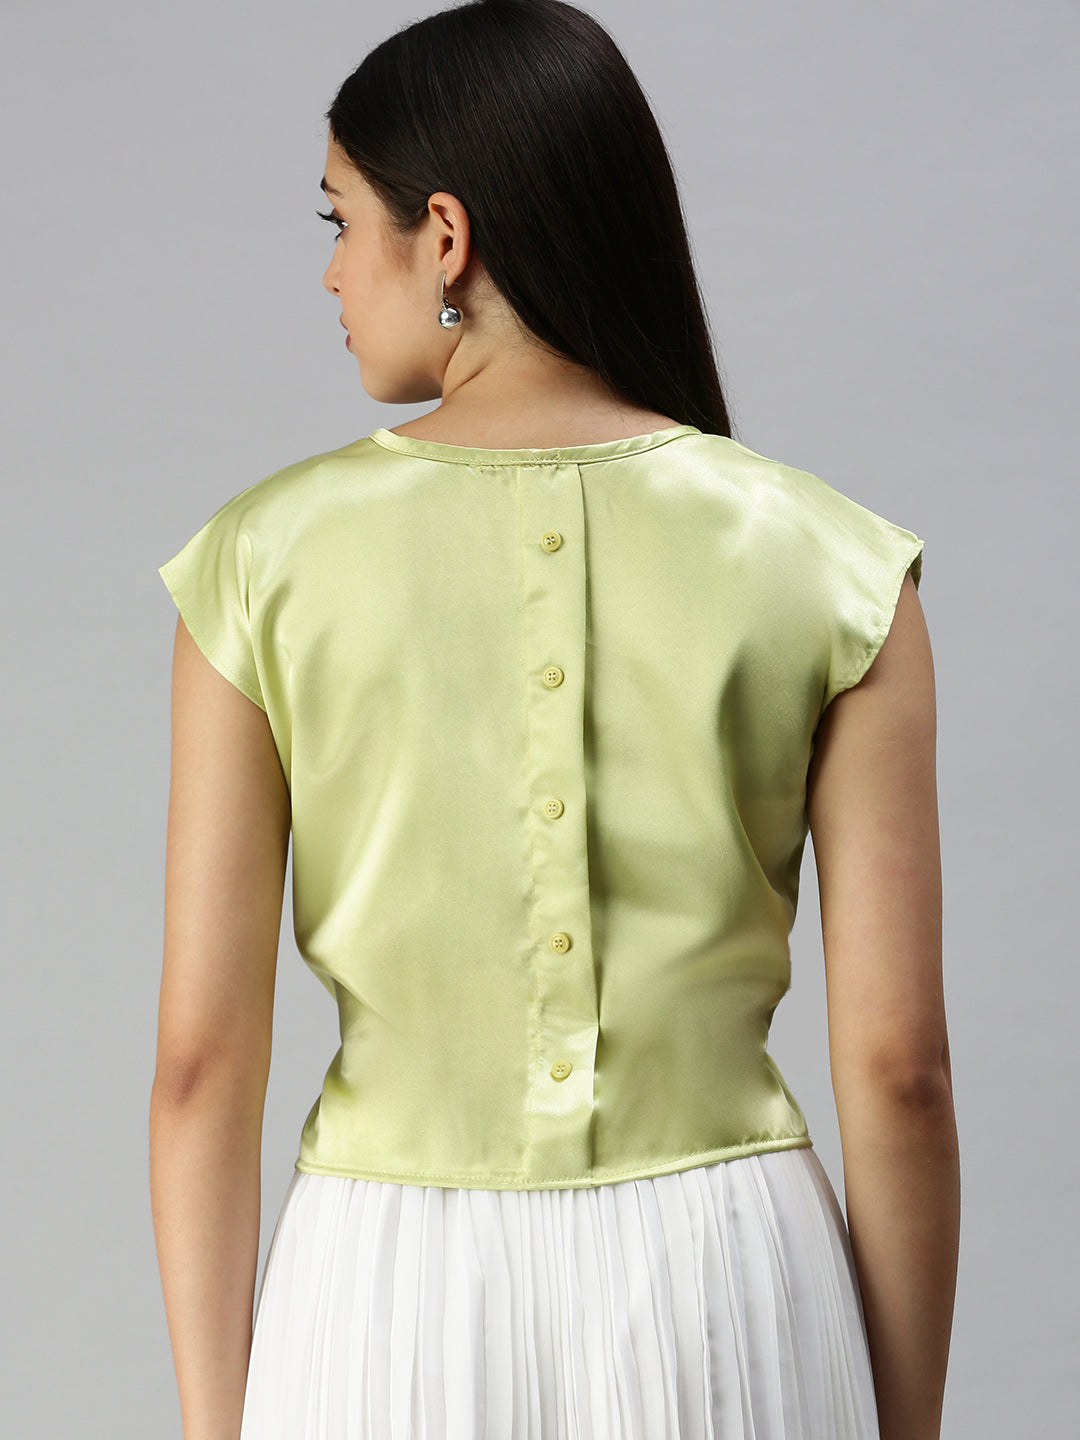 Women's Lime Green Tropical Top